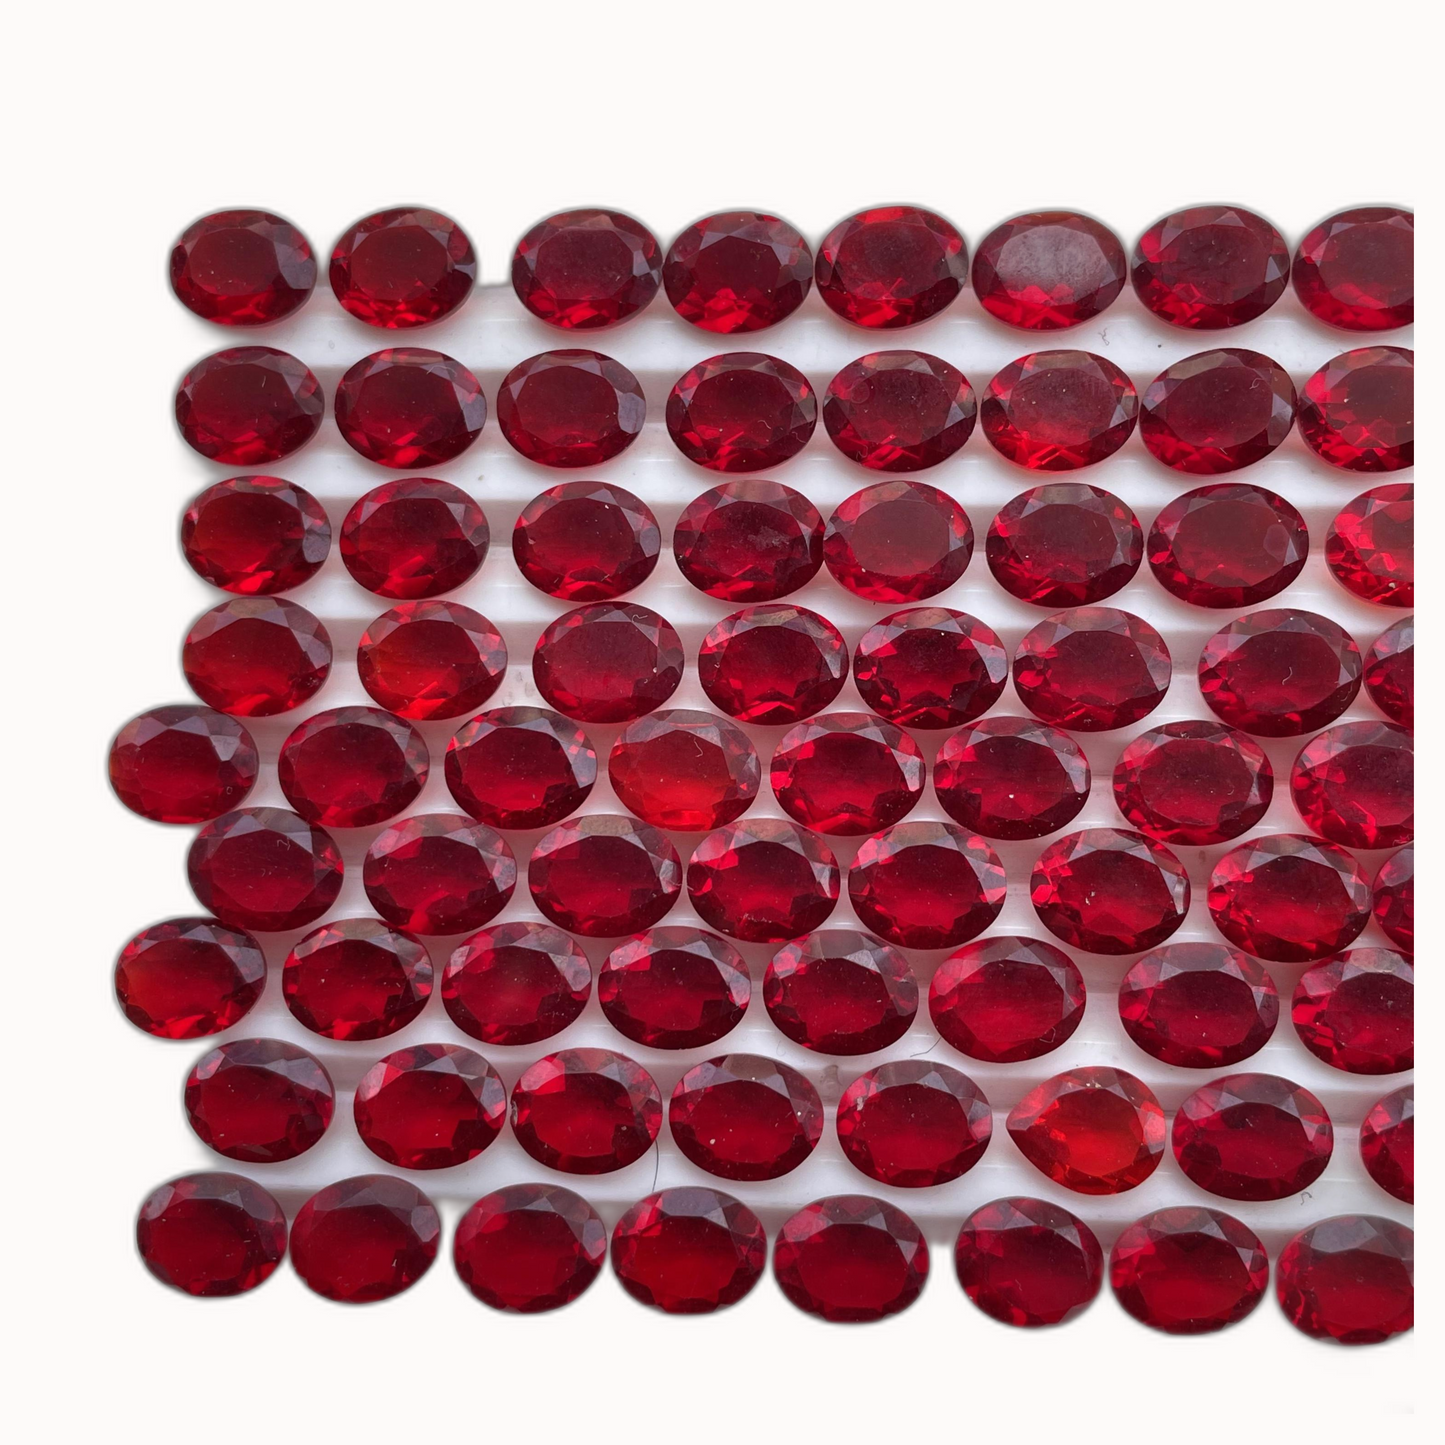 Red Ruby Faceted Nice Quality (8-10 mm) Oval Shape